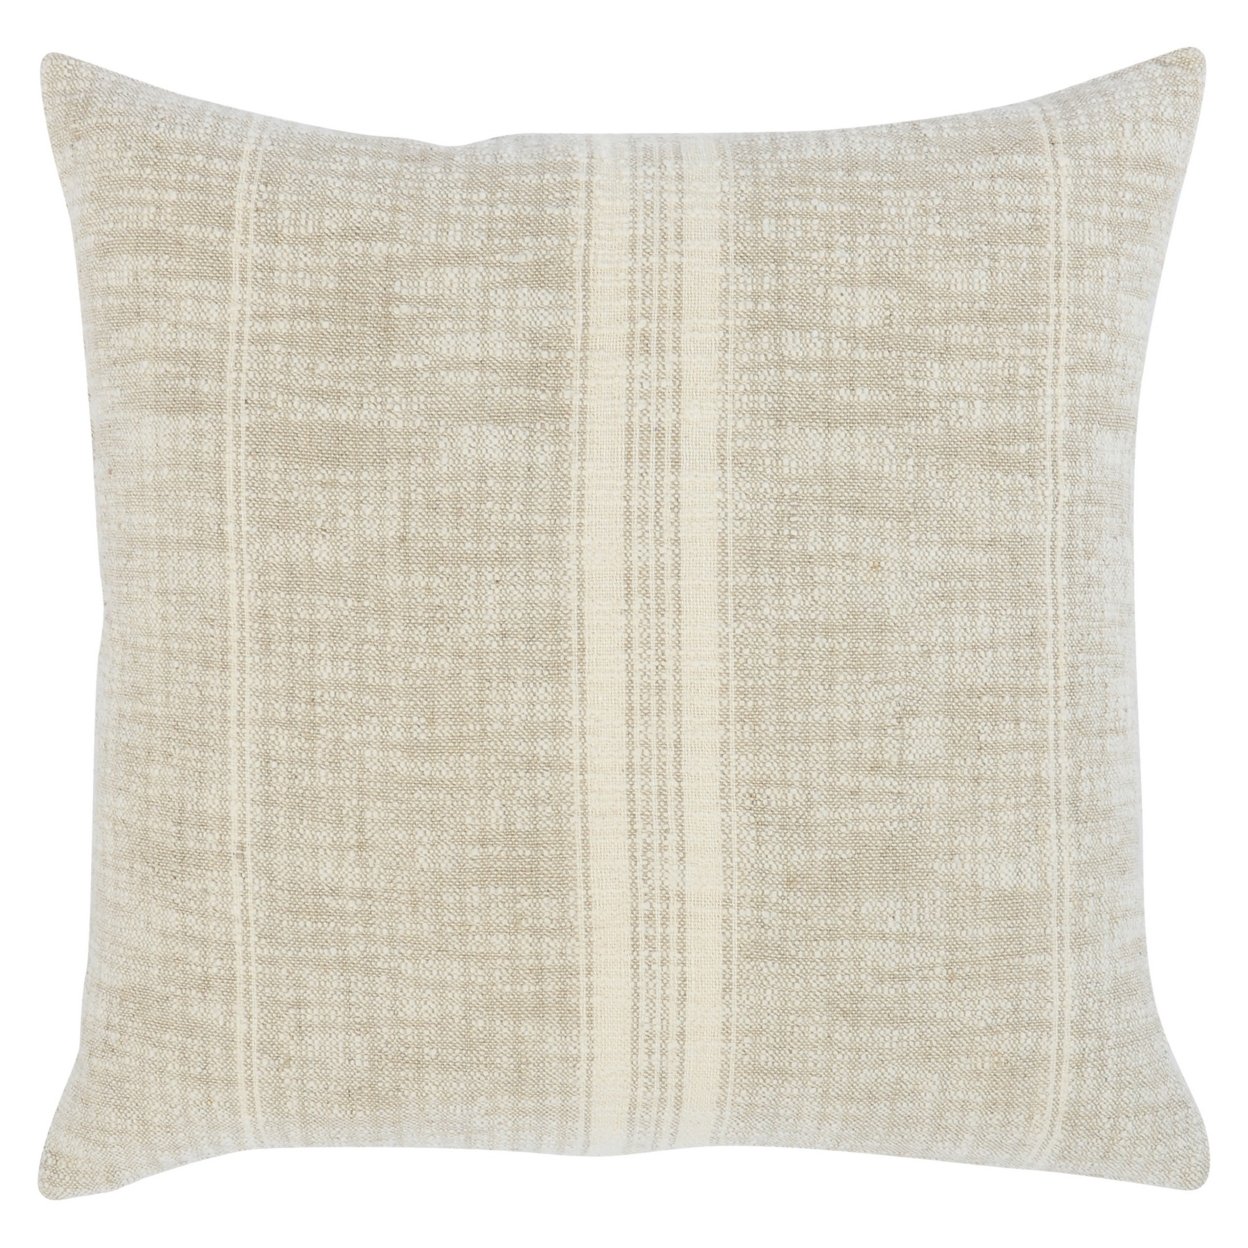 Tia 22 Inch Square Accent Throw Pillow With Woven Striped Ivory Linen Blend- Saltoro Sherpi